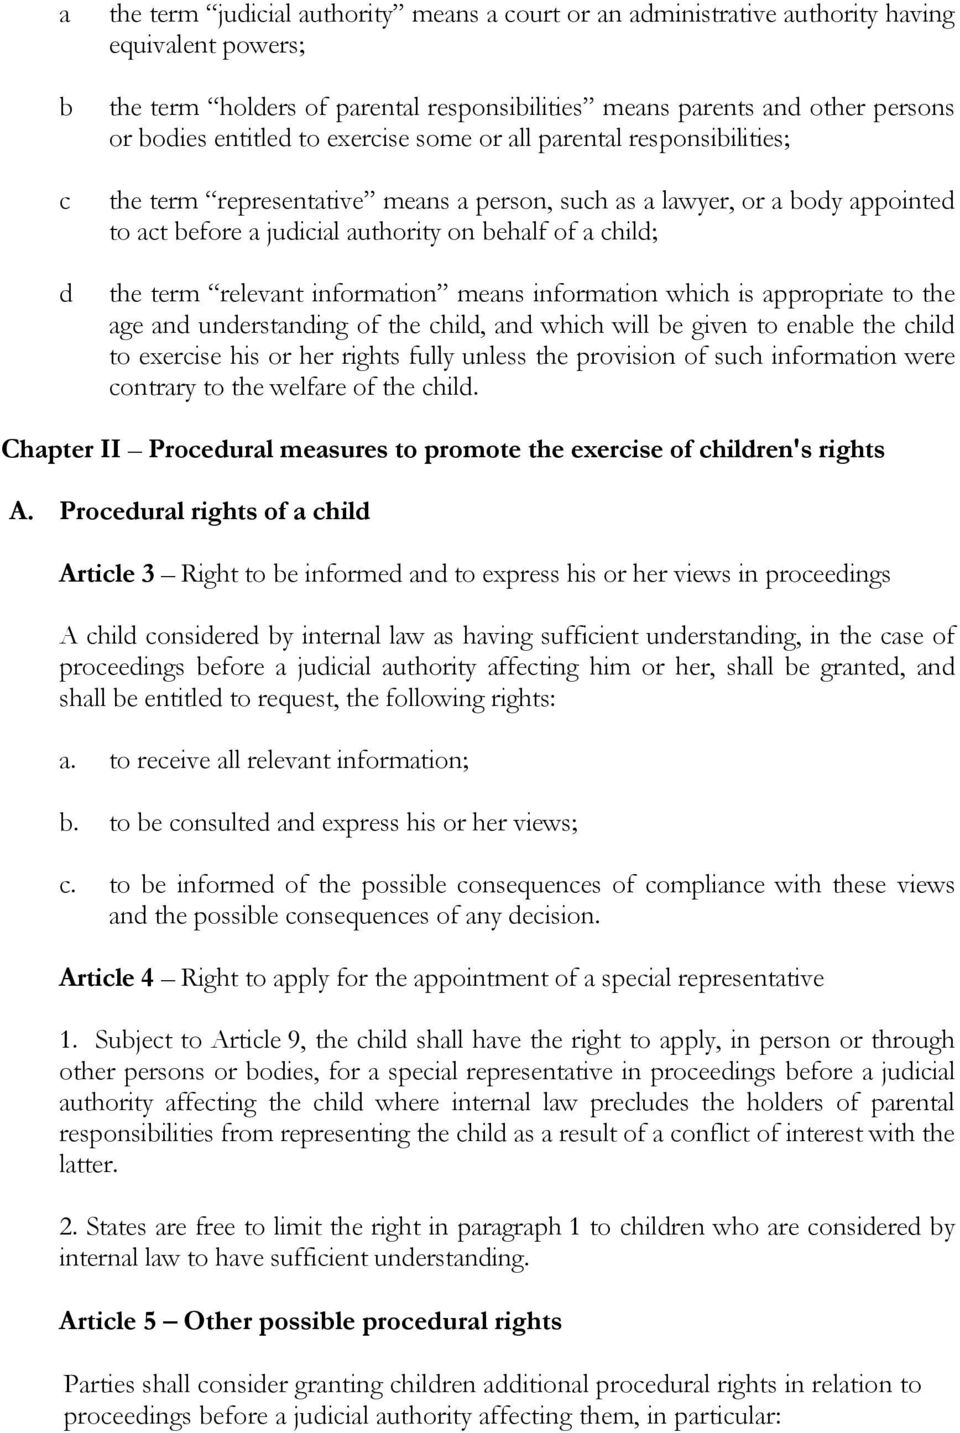 term relevant information means information which is appropriate to the age and understanding of the child, and which will be given to enable the child to exercise his or her rights fully unless the